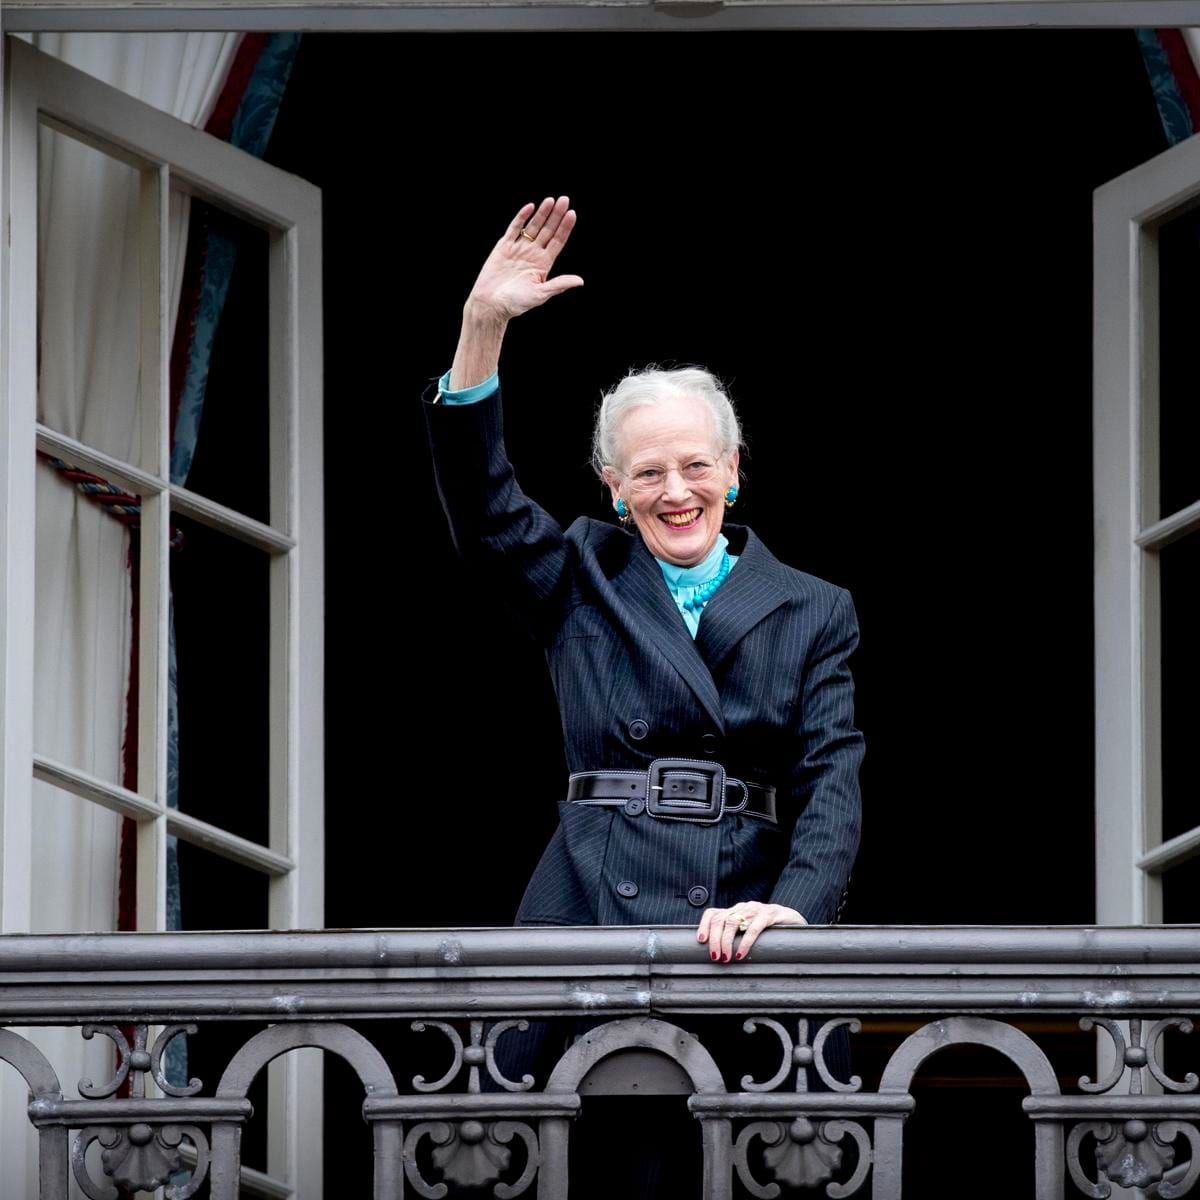 Frederik’s mother will continue to bear the title HM Queen Margrethe after her abdication